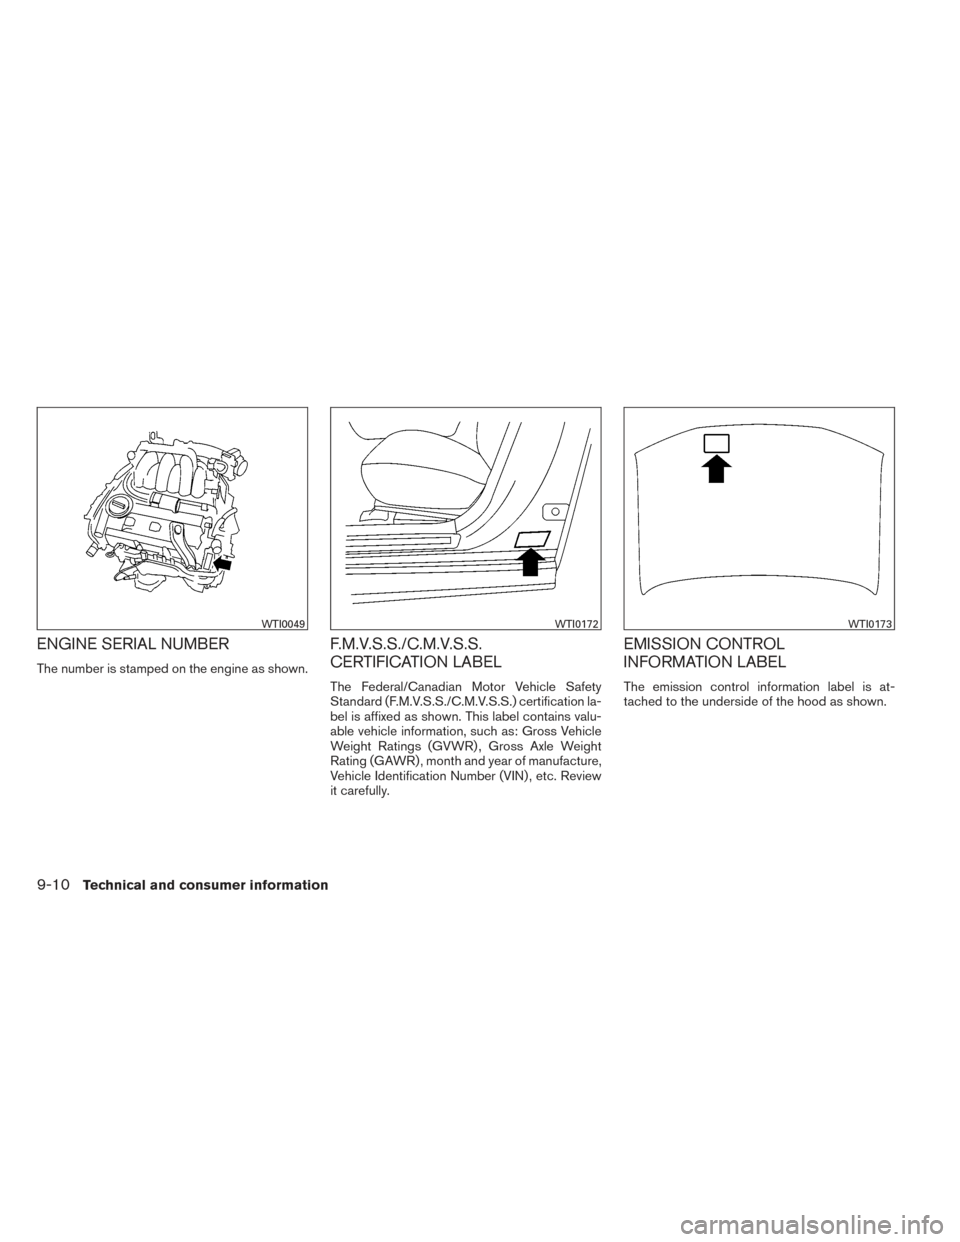 NISSAN MAXIMA 2014 A35 / 7.G Owners Manual ENGINE SERIAL NUMBER
The number is stamped on the engine as shown.
F.M.V.S.S./C.M.V.S.S.
CERTIFICATION LABEL
The Federal/Canadian Motor Vehicle Safety
Standard (F.M.V.S.S./C.M.V.S.S.) certification la